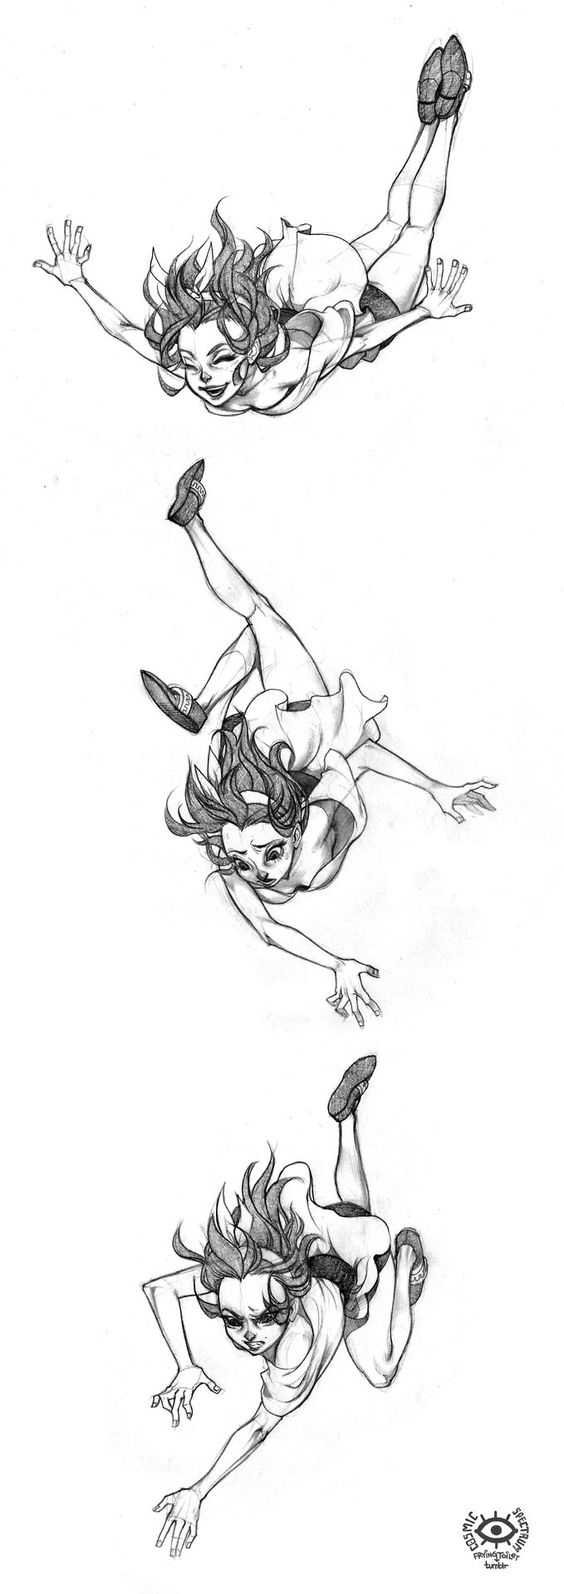 Falling Pose Reference Drawing and Sketch Collection for Artists Art